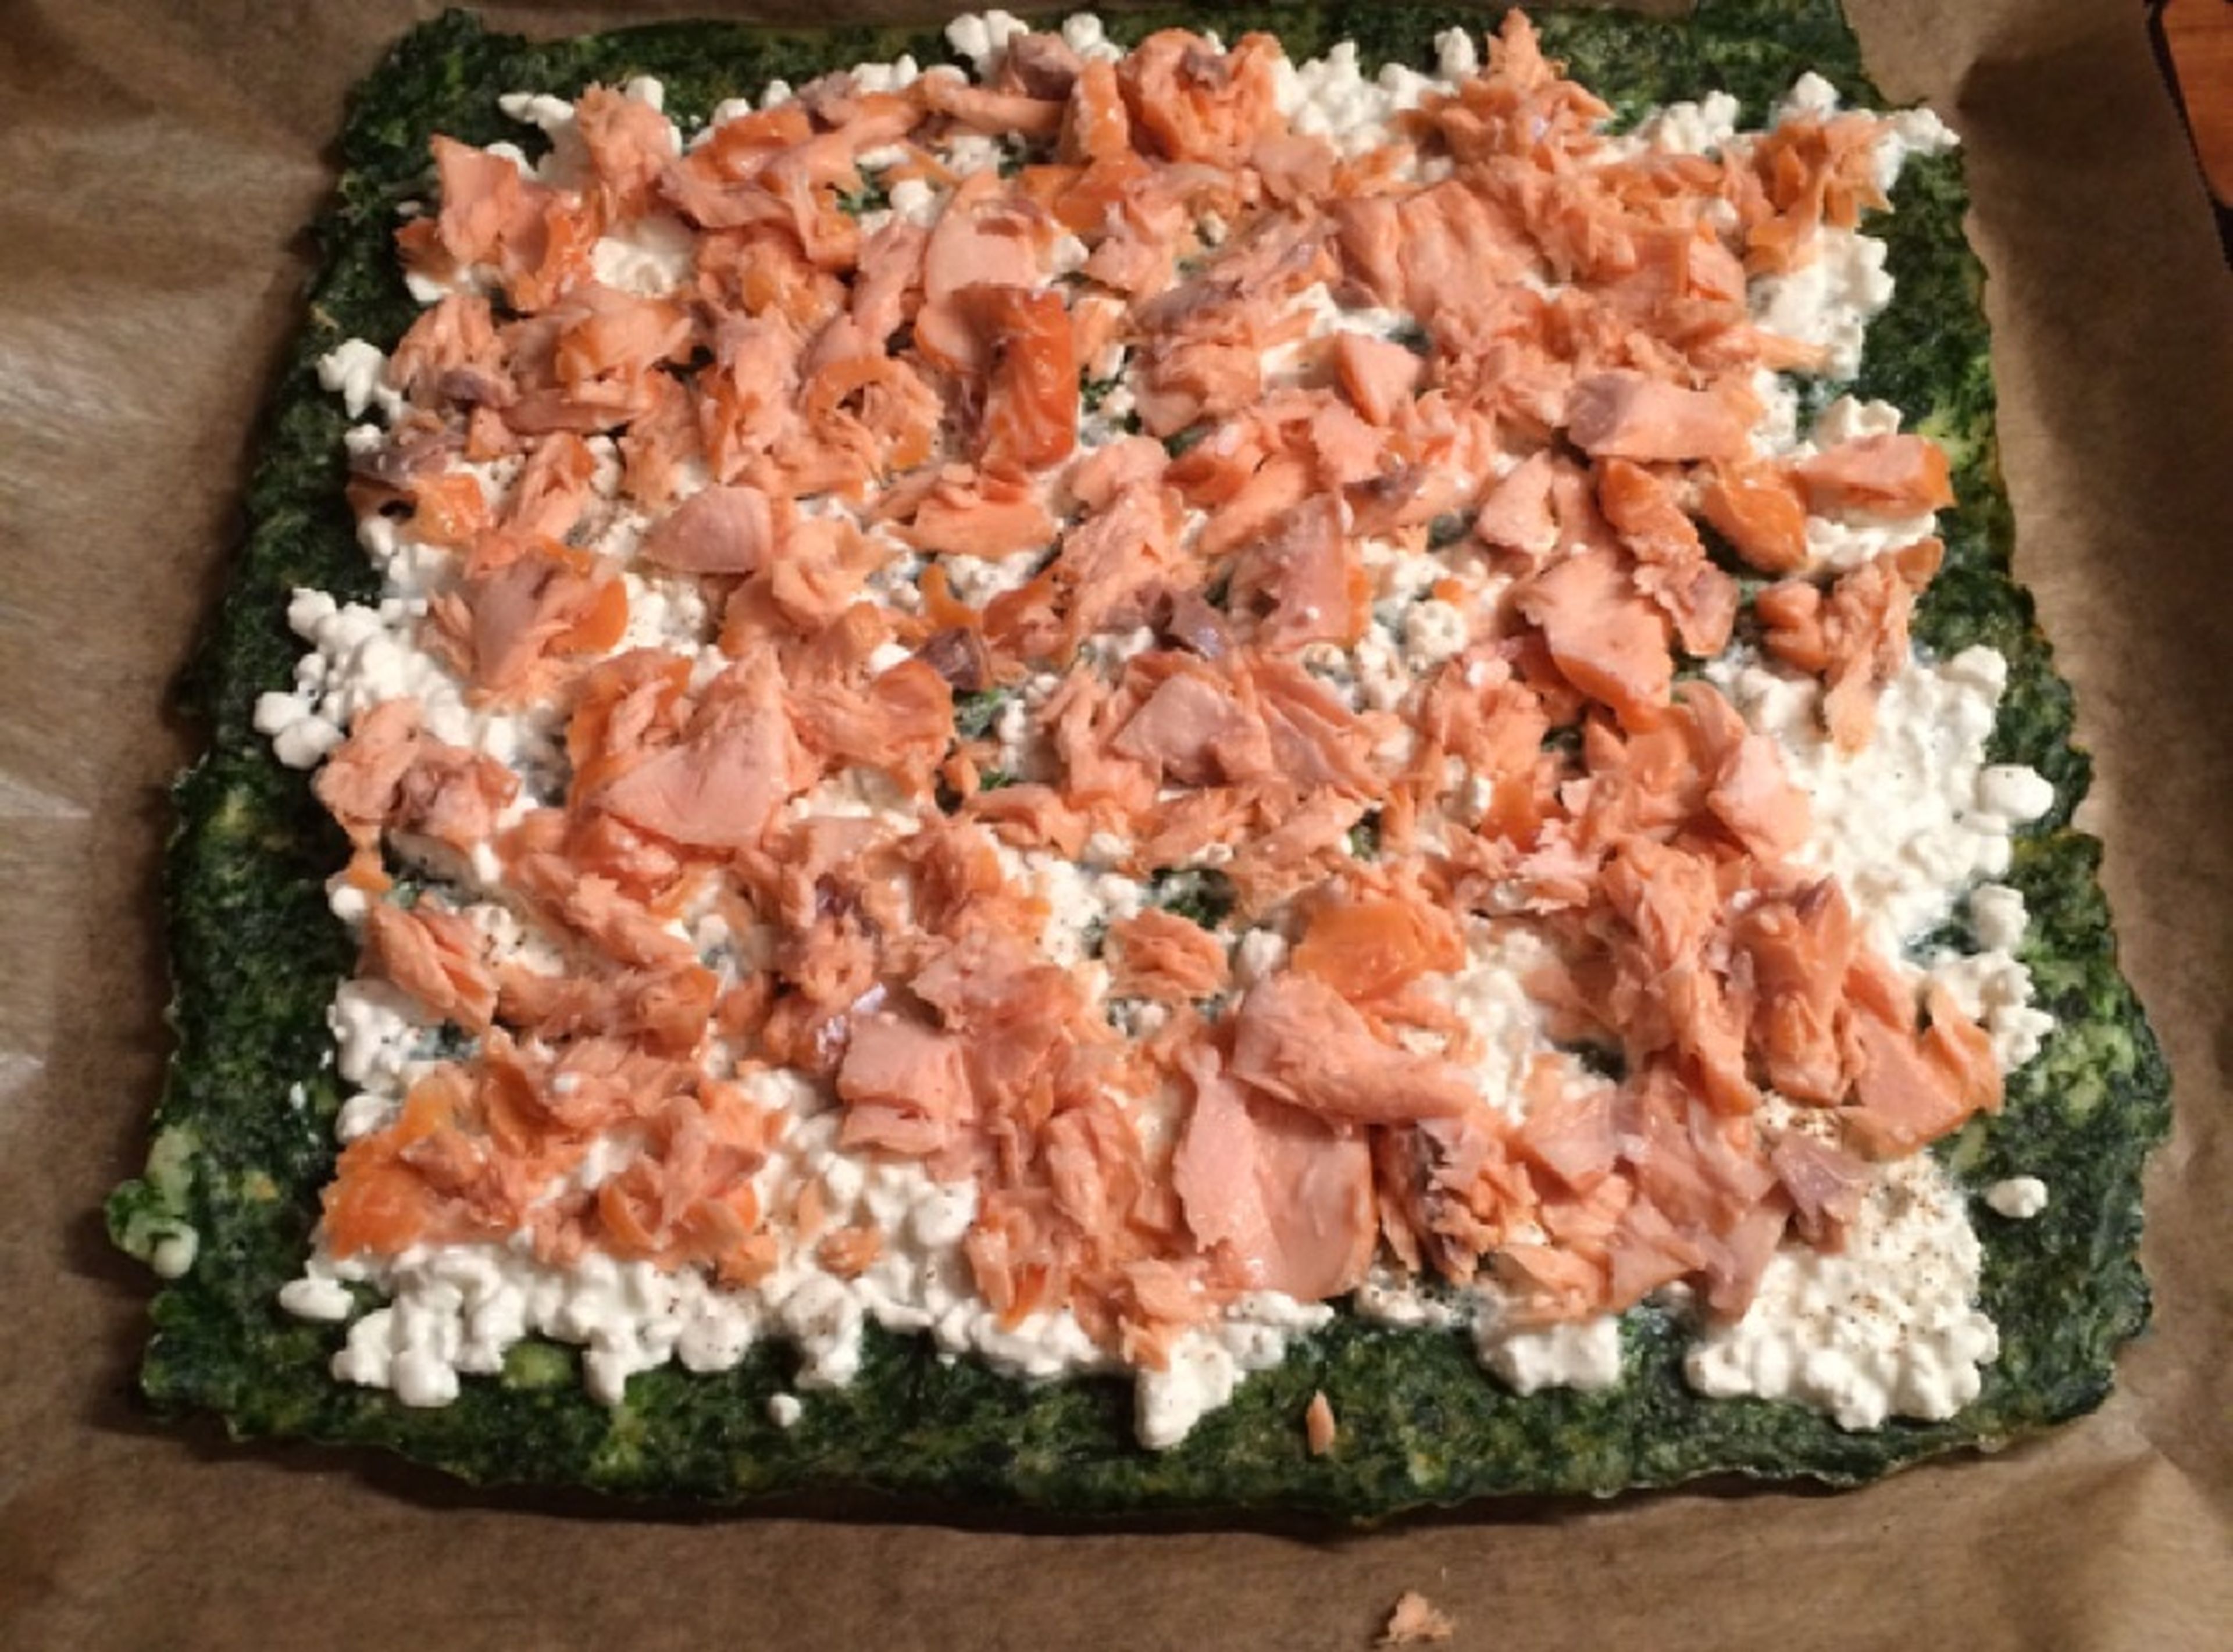 Spread the cottage cheese on top of the spinach layer and add an even layer of smoked salmon. Roll up gently into a log.